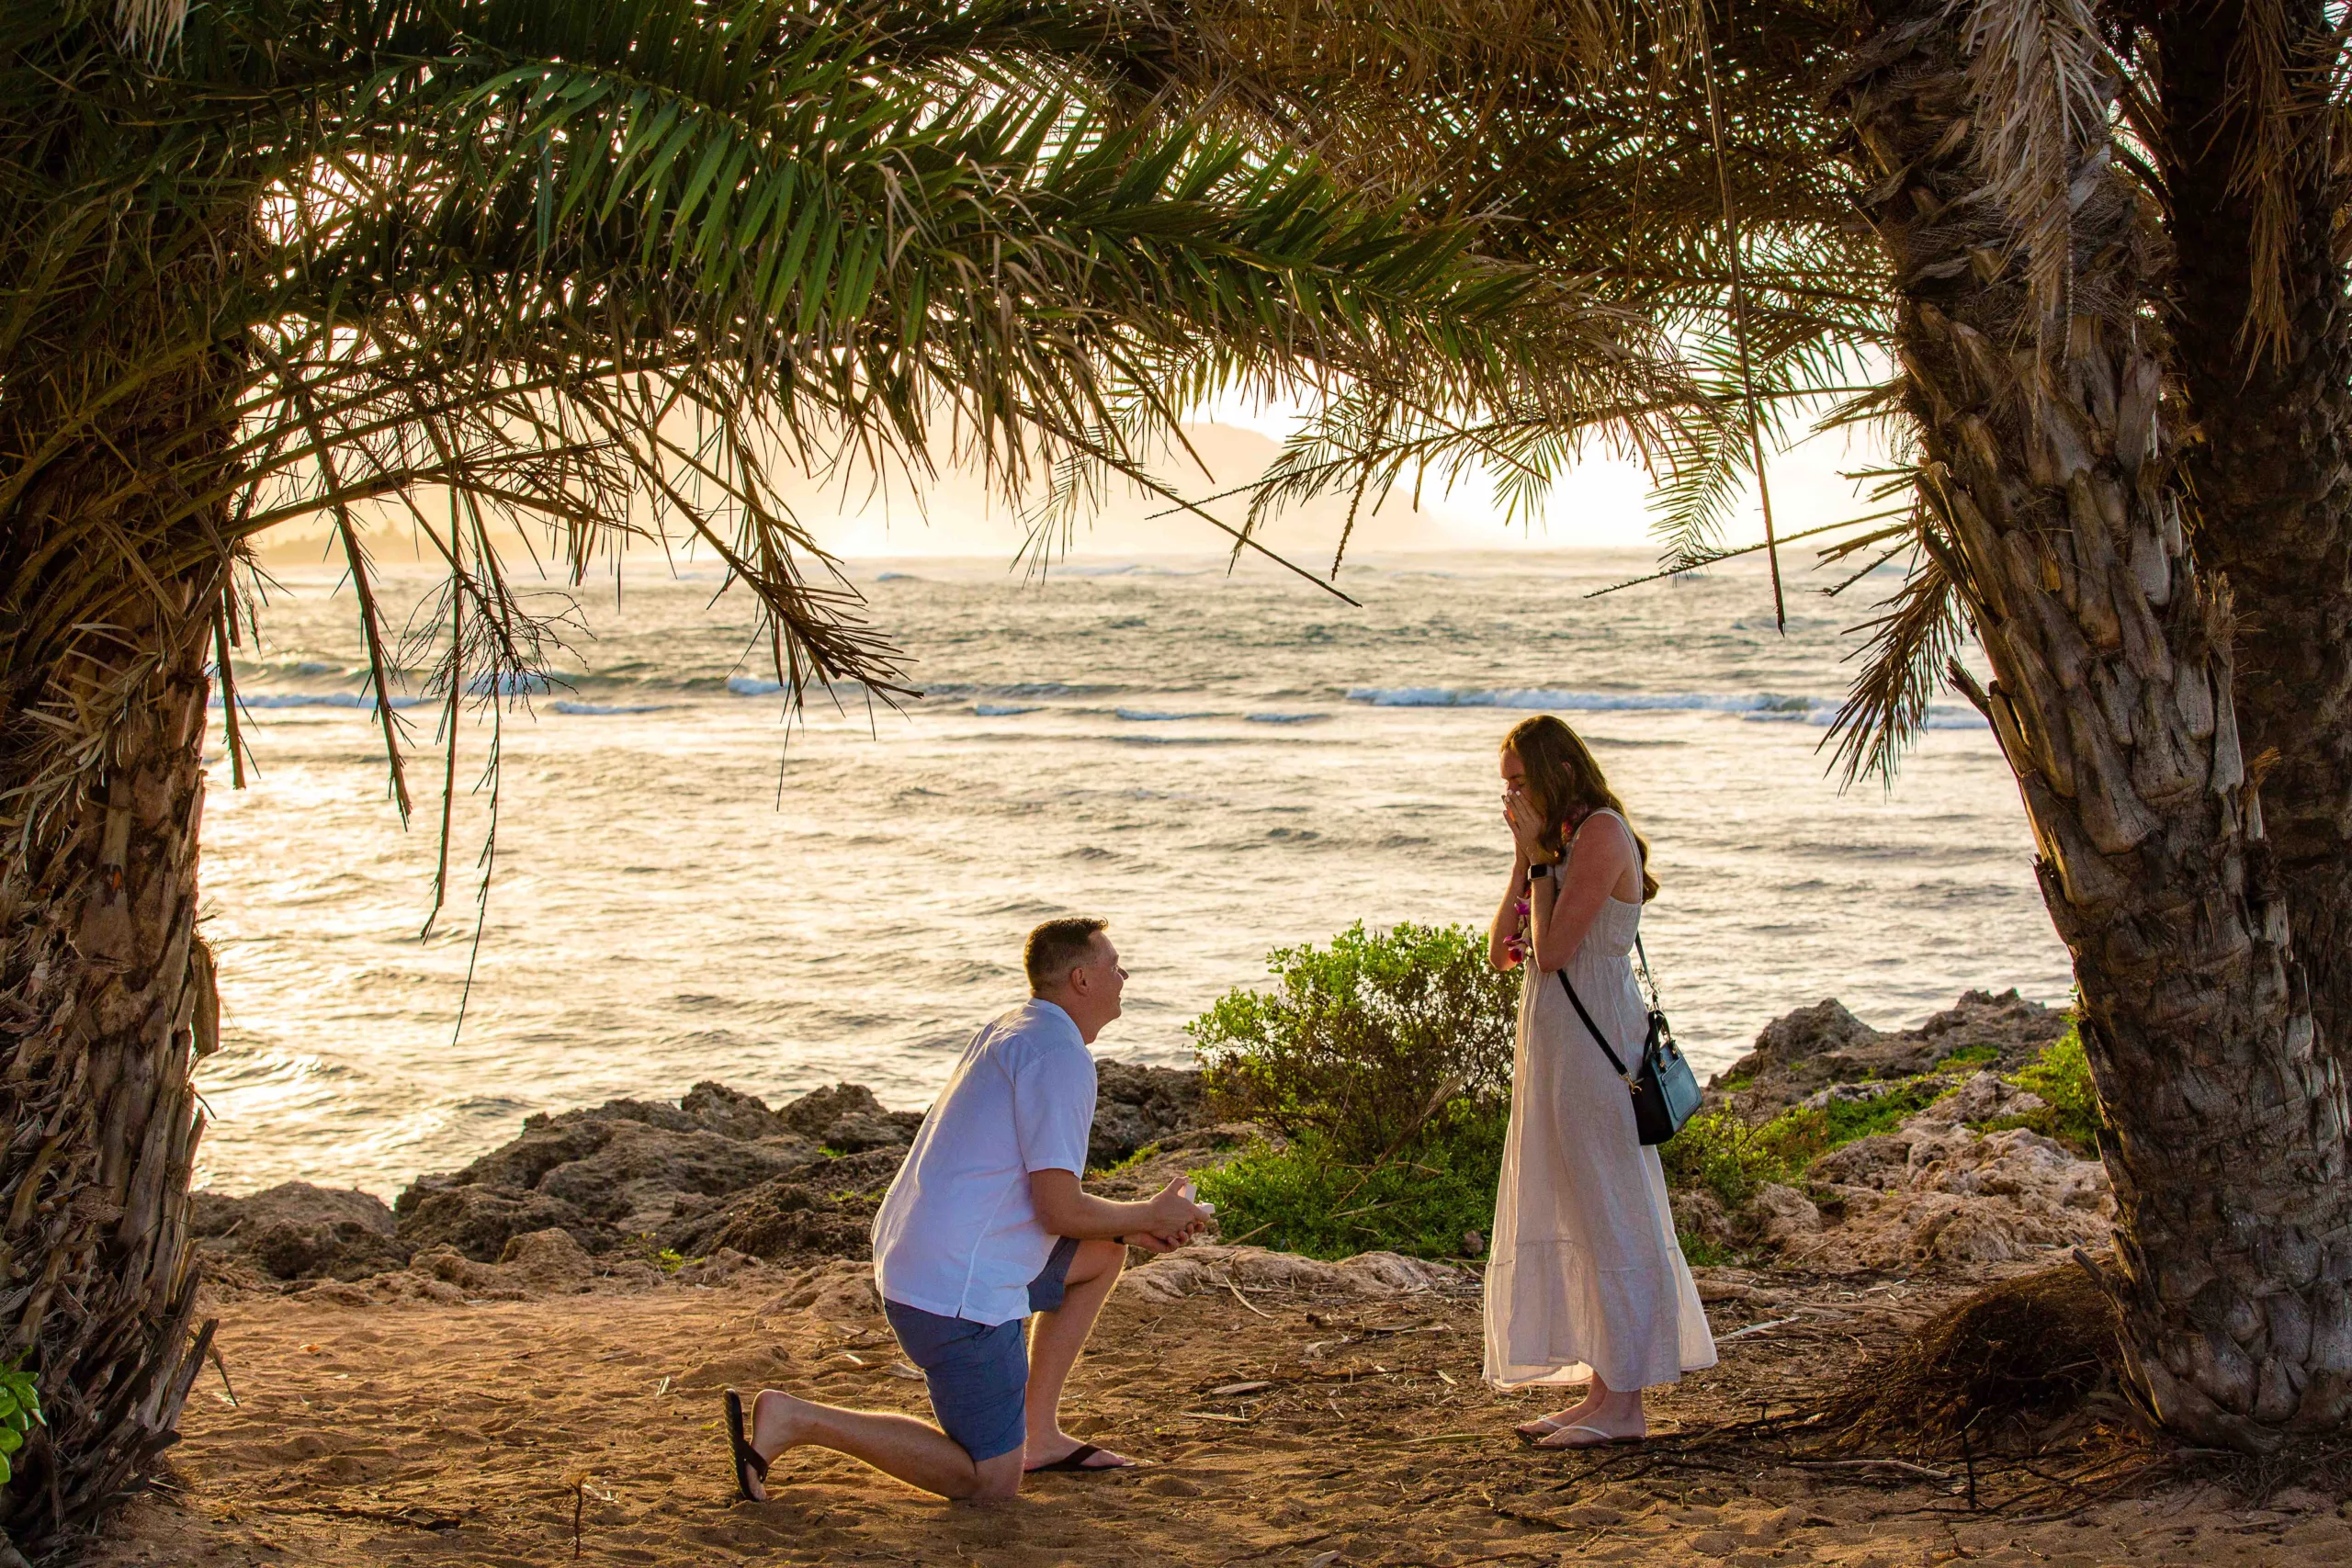 an image of a man kneeling down in front of a woman proposing to her captured by a North shore photographer